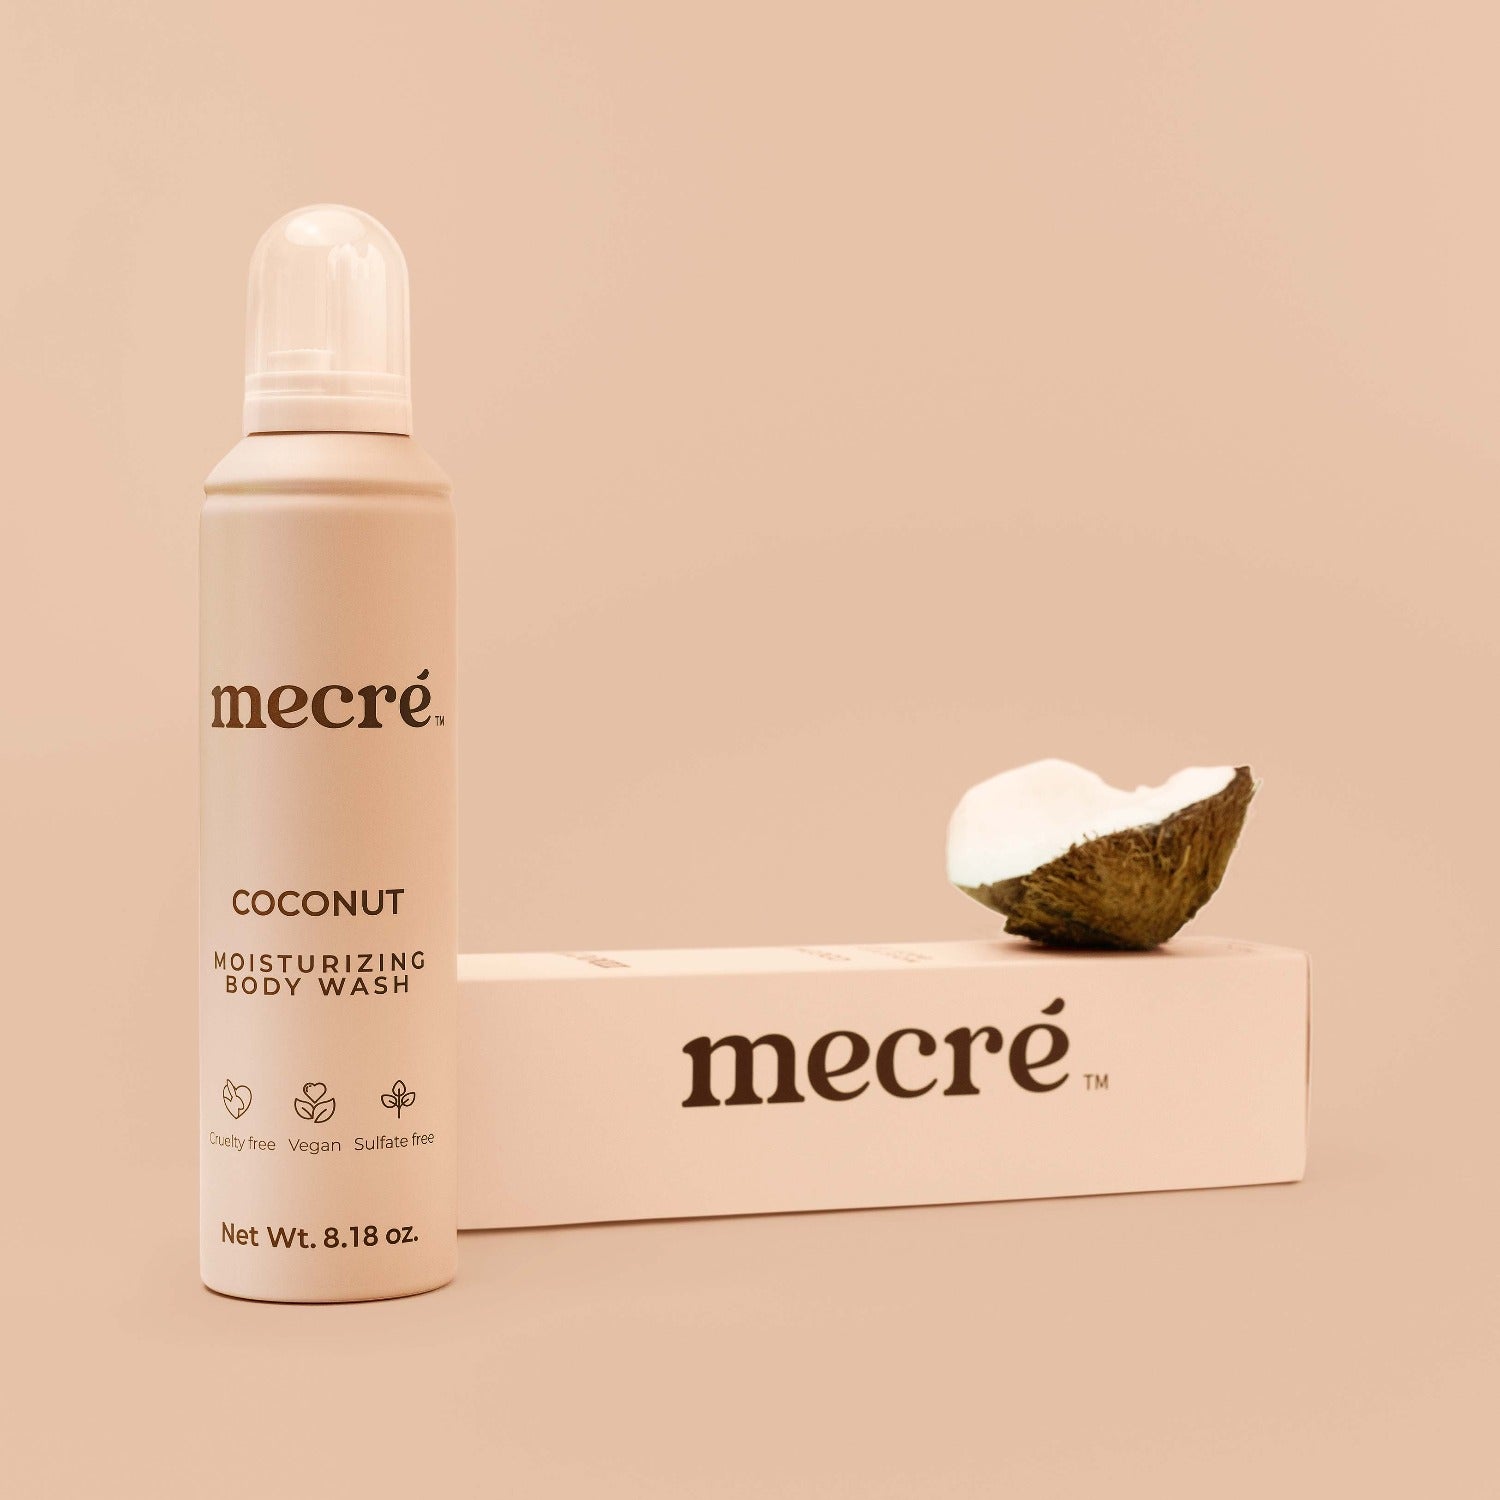 Front view of Mecré moisturizing body wash in coconut scent, displayed with its packaging and half coconut.